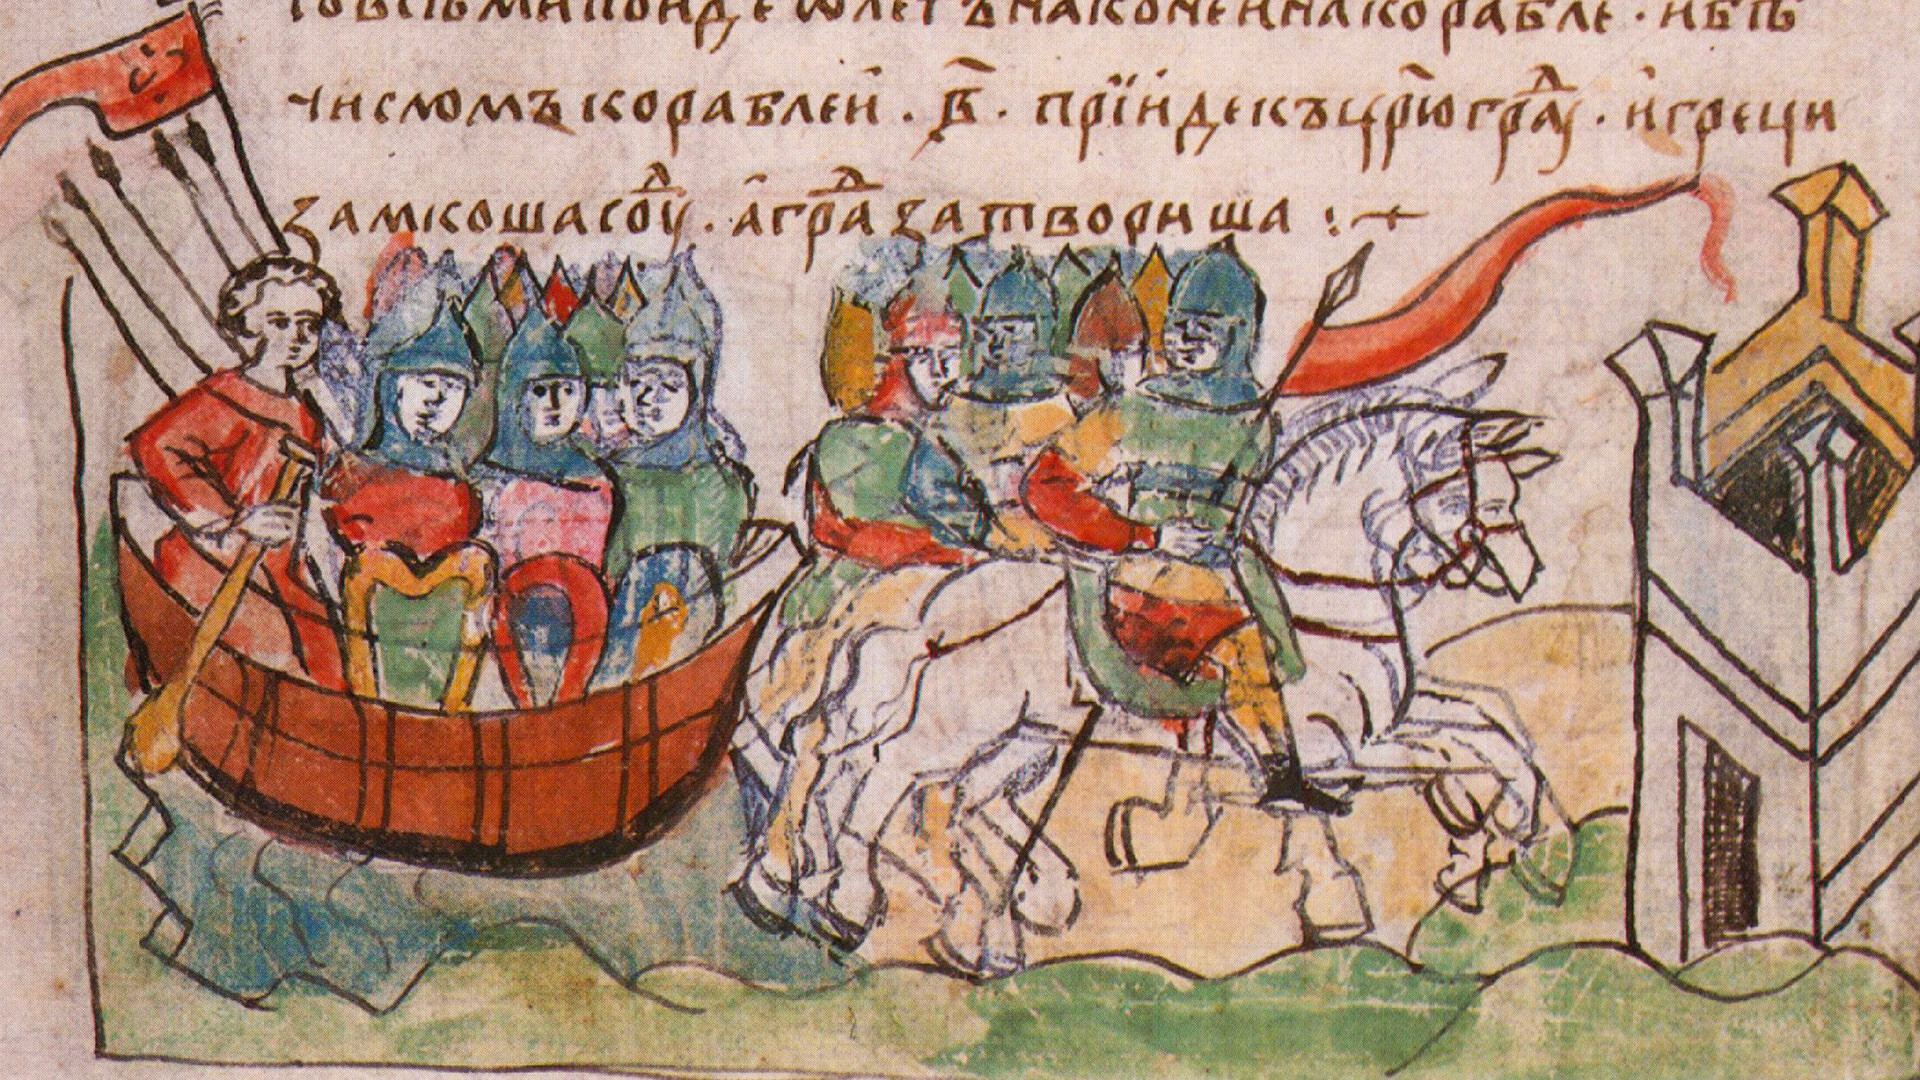 Prince Oleg and his armyat the walls of the Constantinopole. 